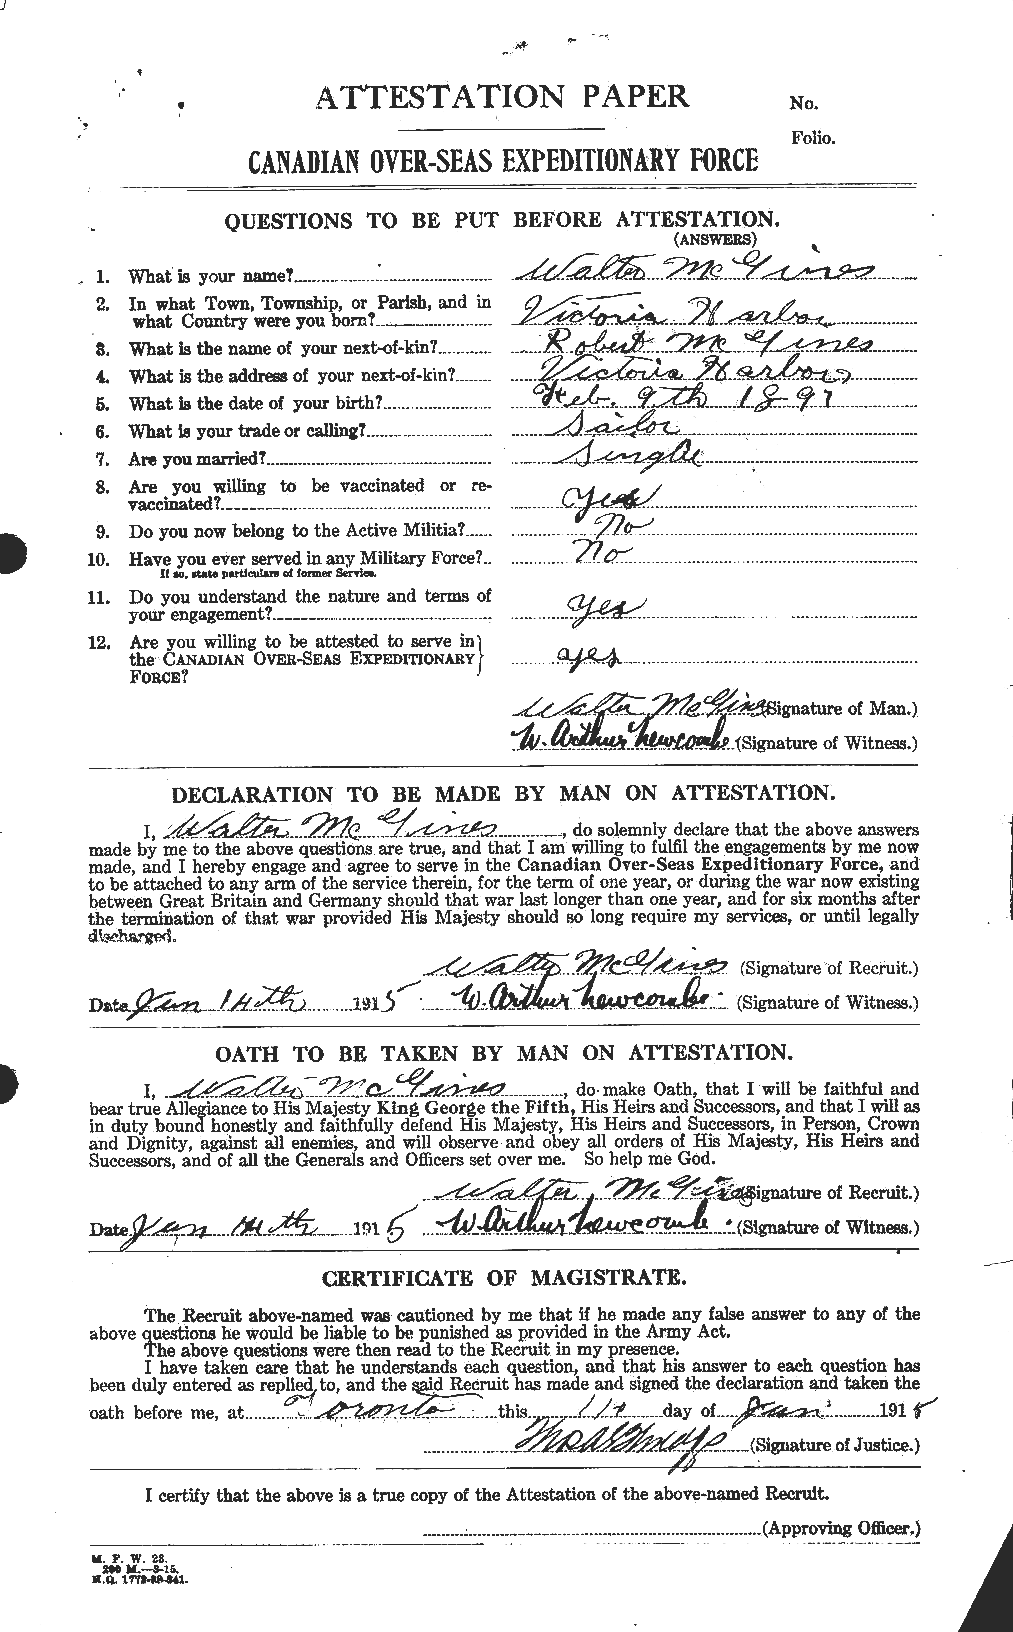 Personnel Records of the First World War - CEF 526308a